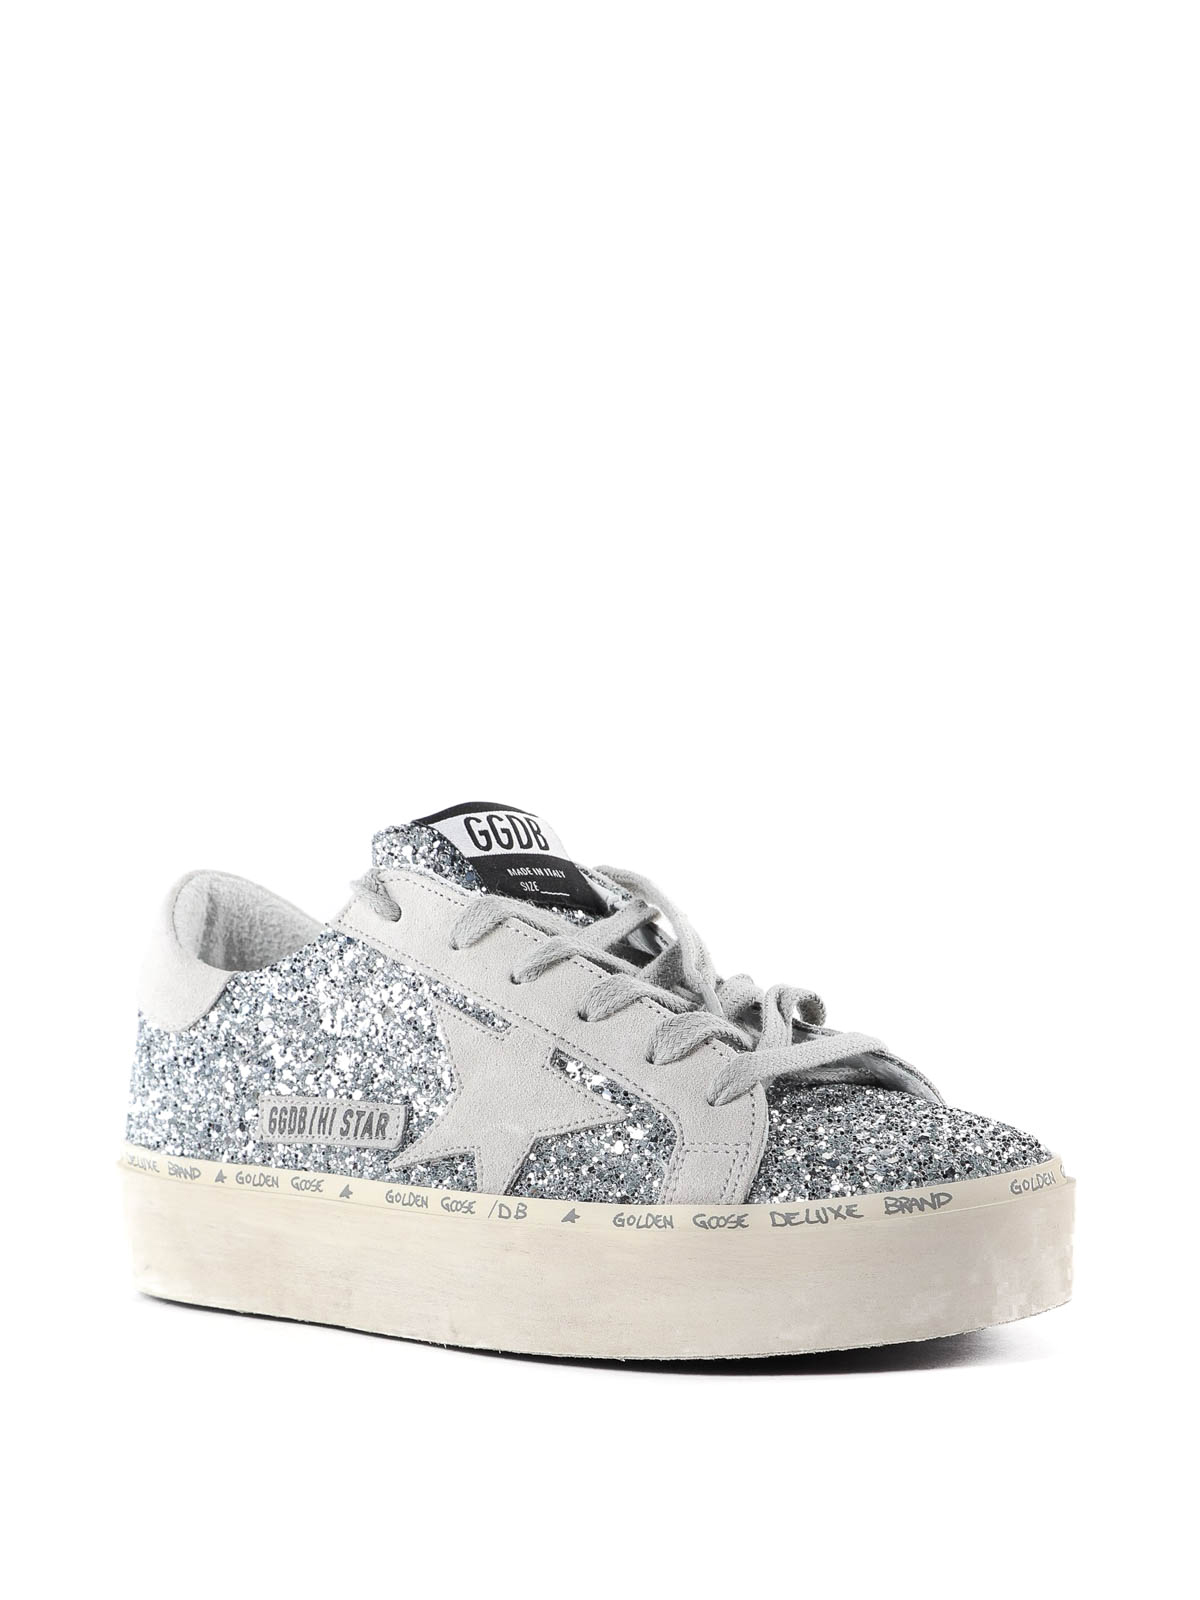 Golden Goose Shoes White Limited Edition Hi Star Nyc Graphic Platform  Sneakers, New in Box WA001 - Julia Rose Boston | Shop